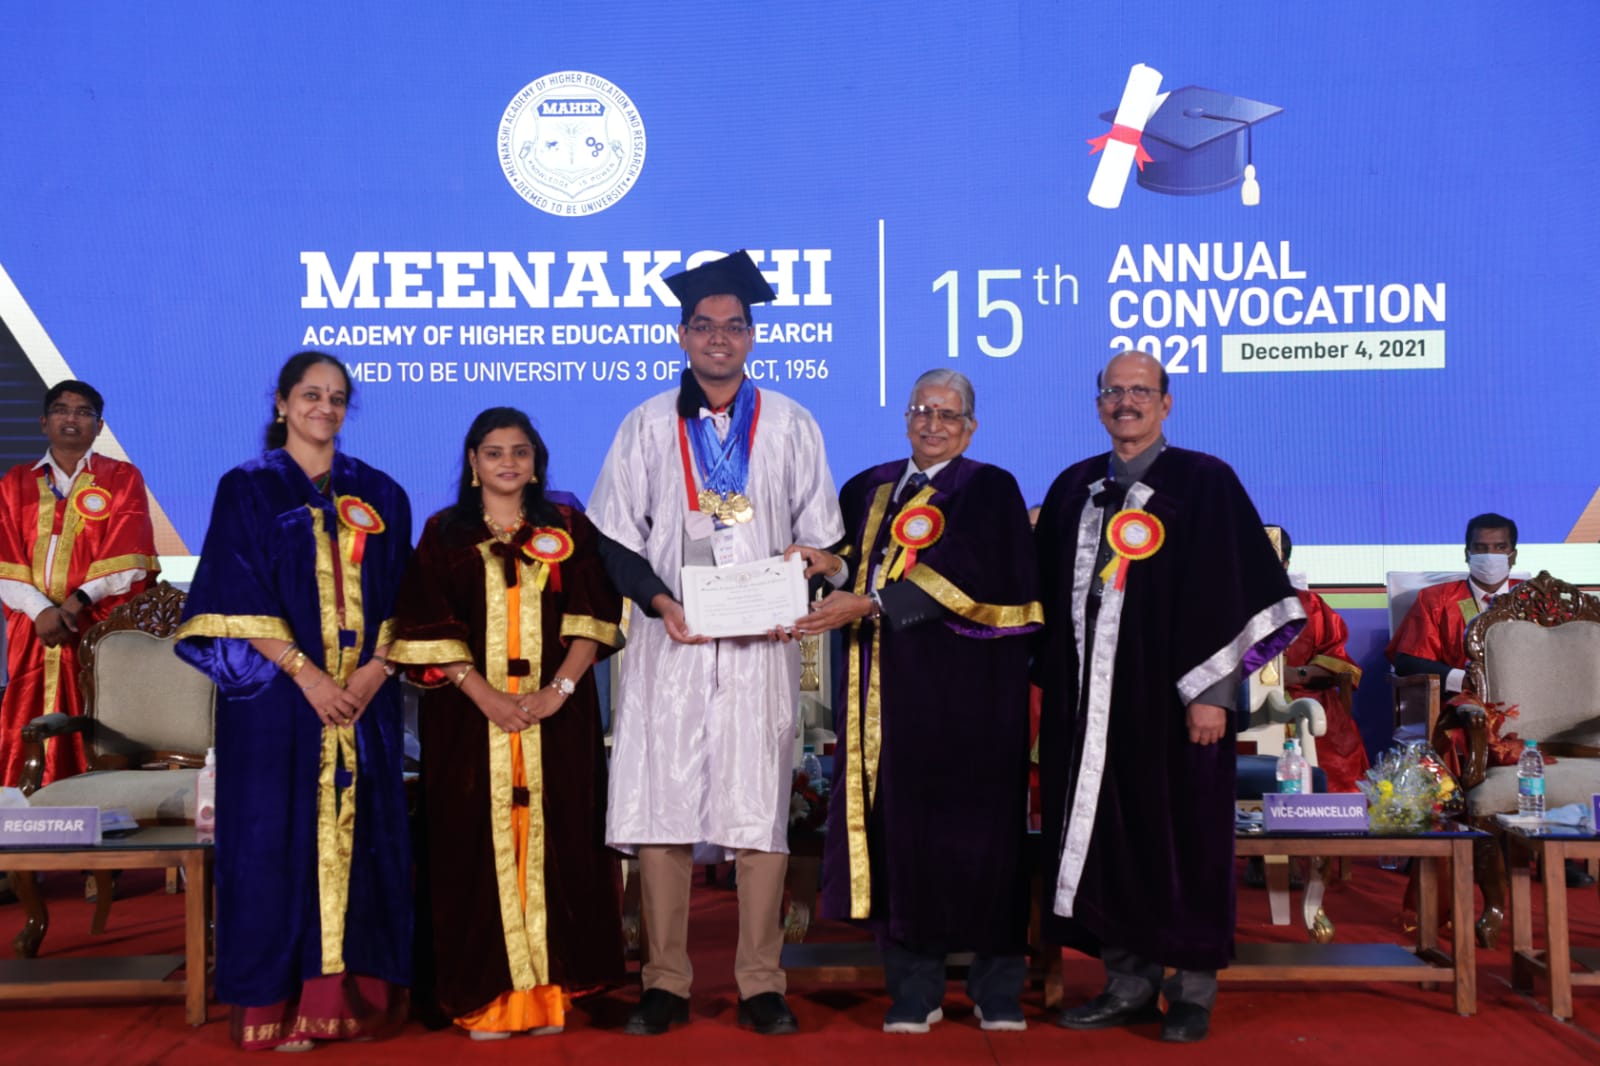 15th annual convocation of Meenakshi Academy of Higher education